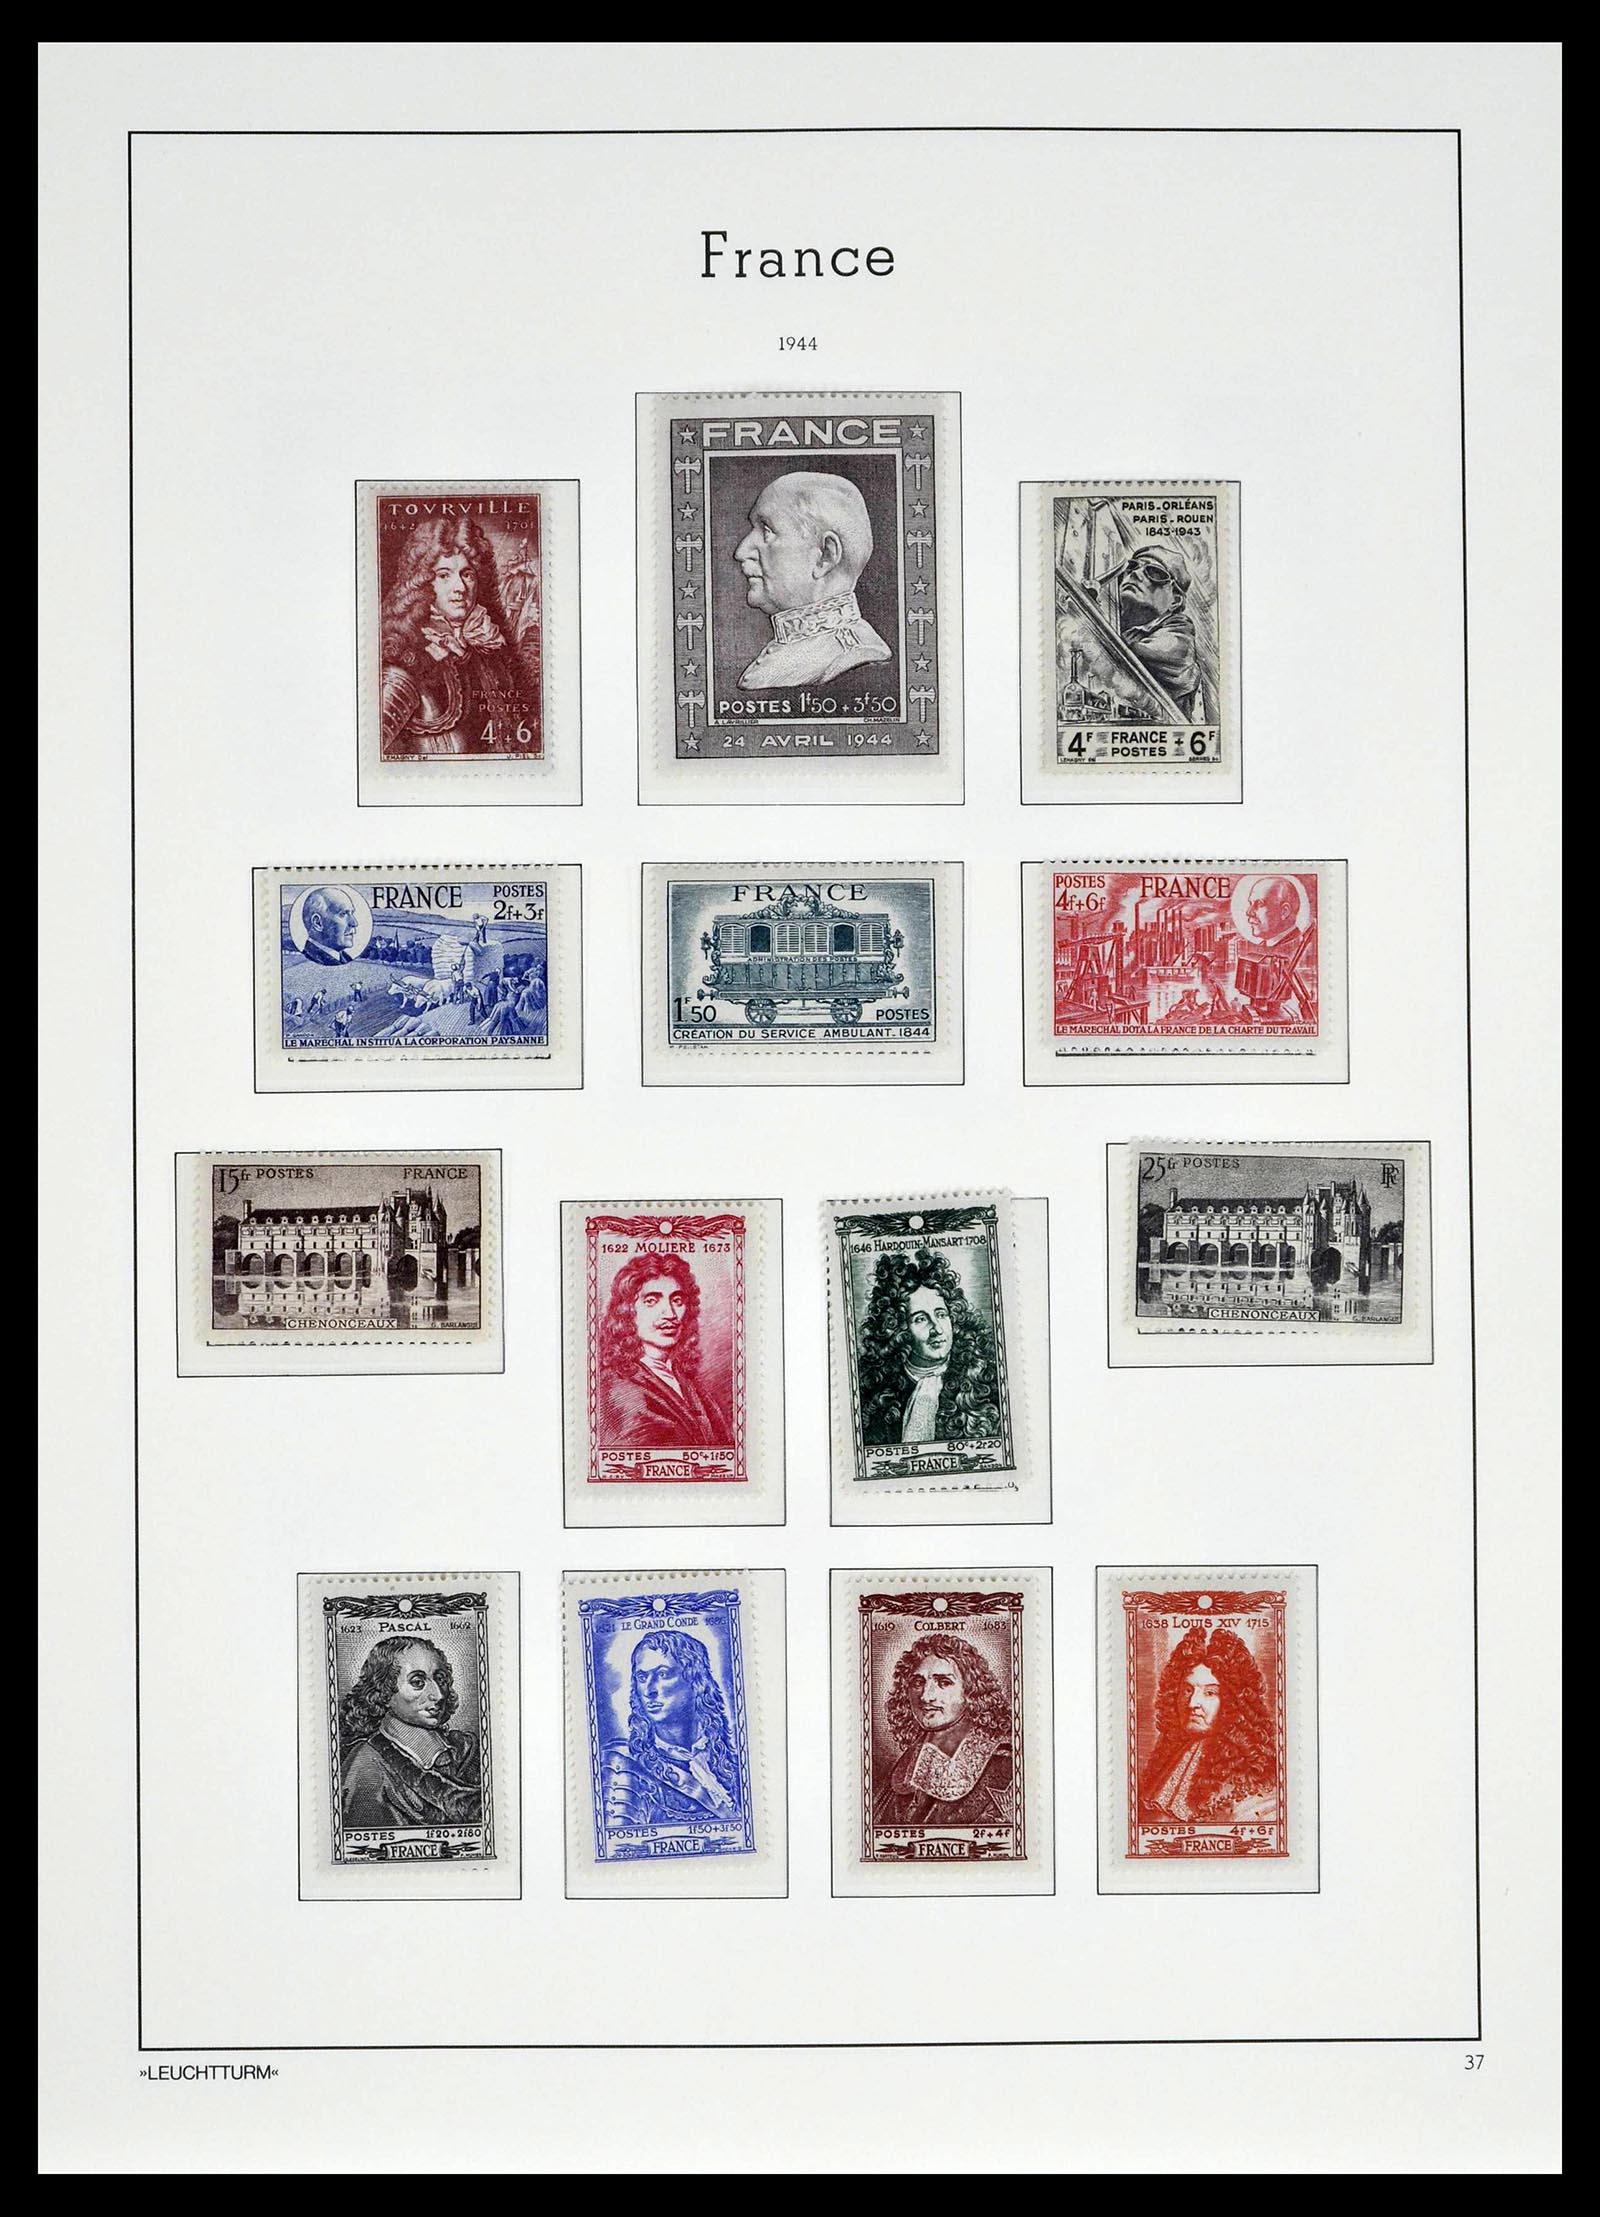 39385 0041 - Stamp collection 39385 France 1900-1944.